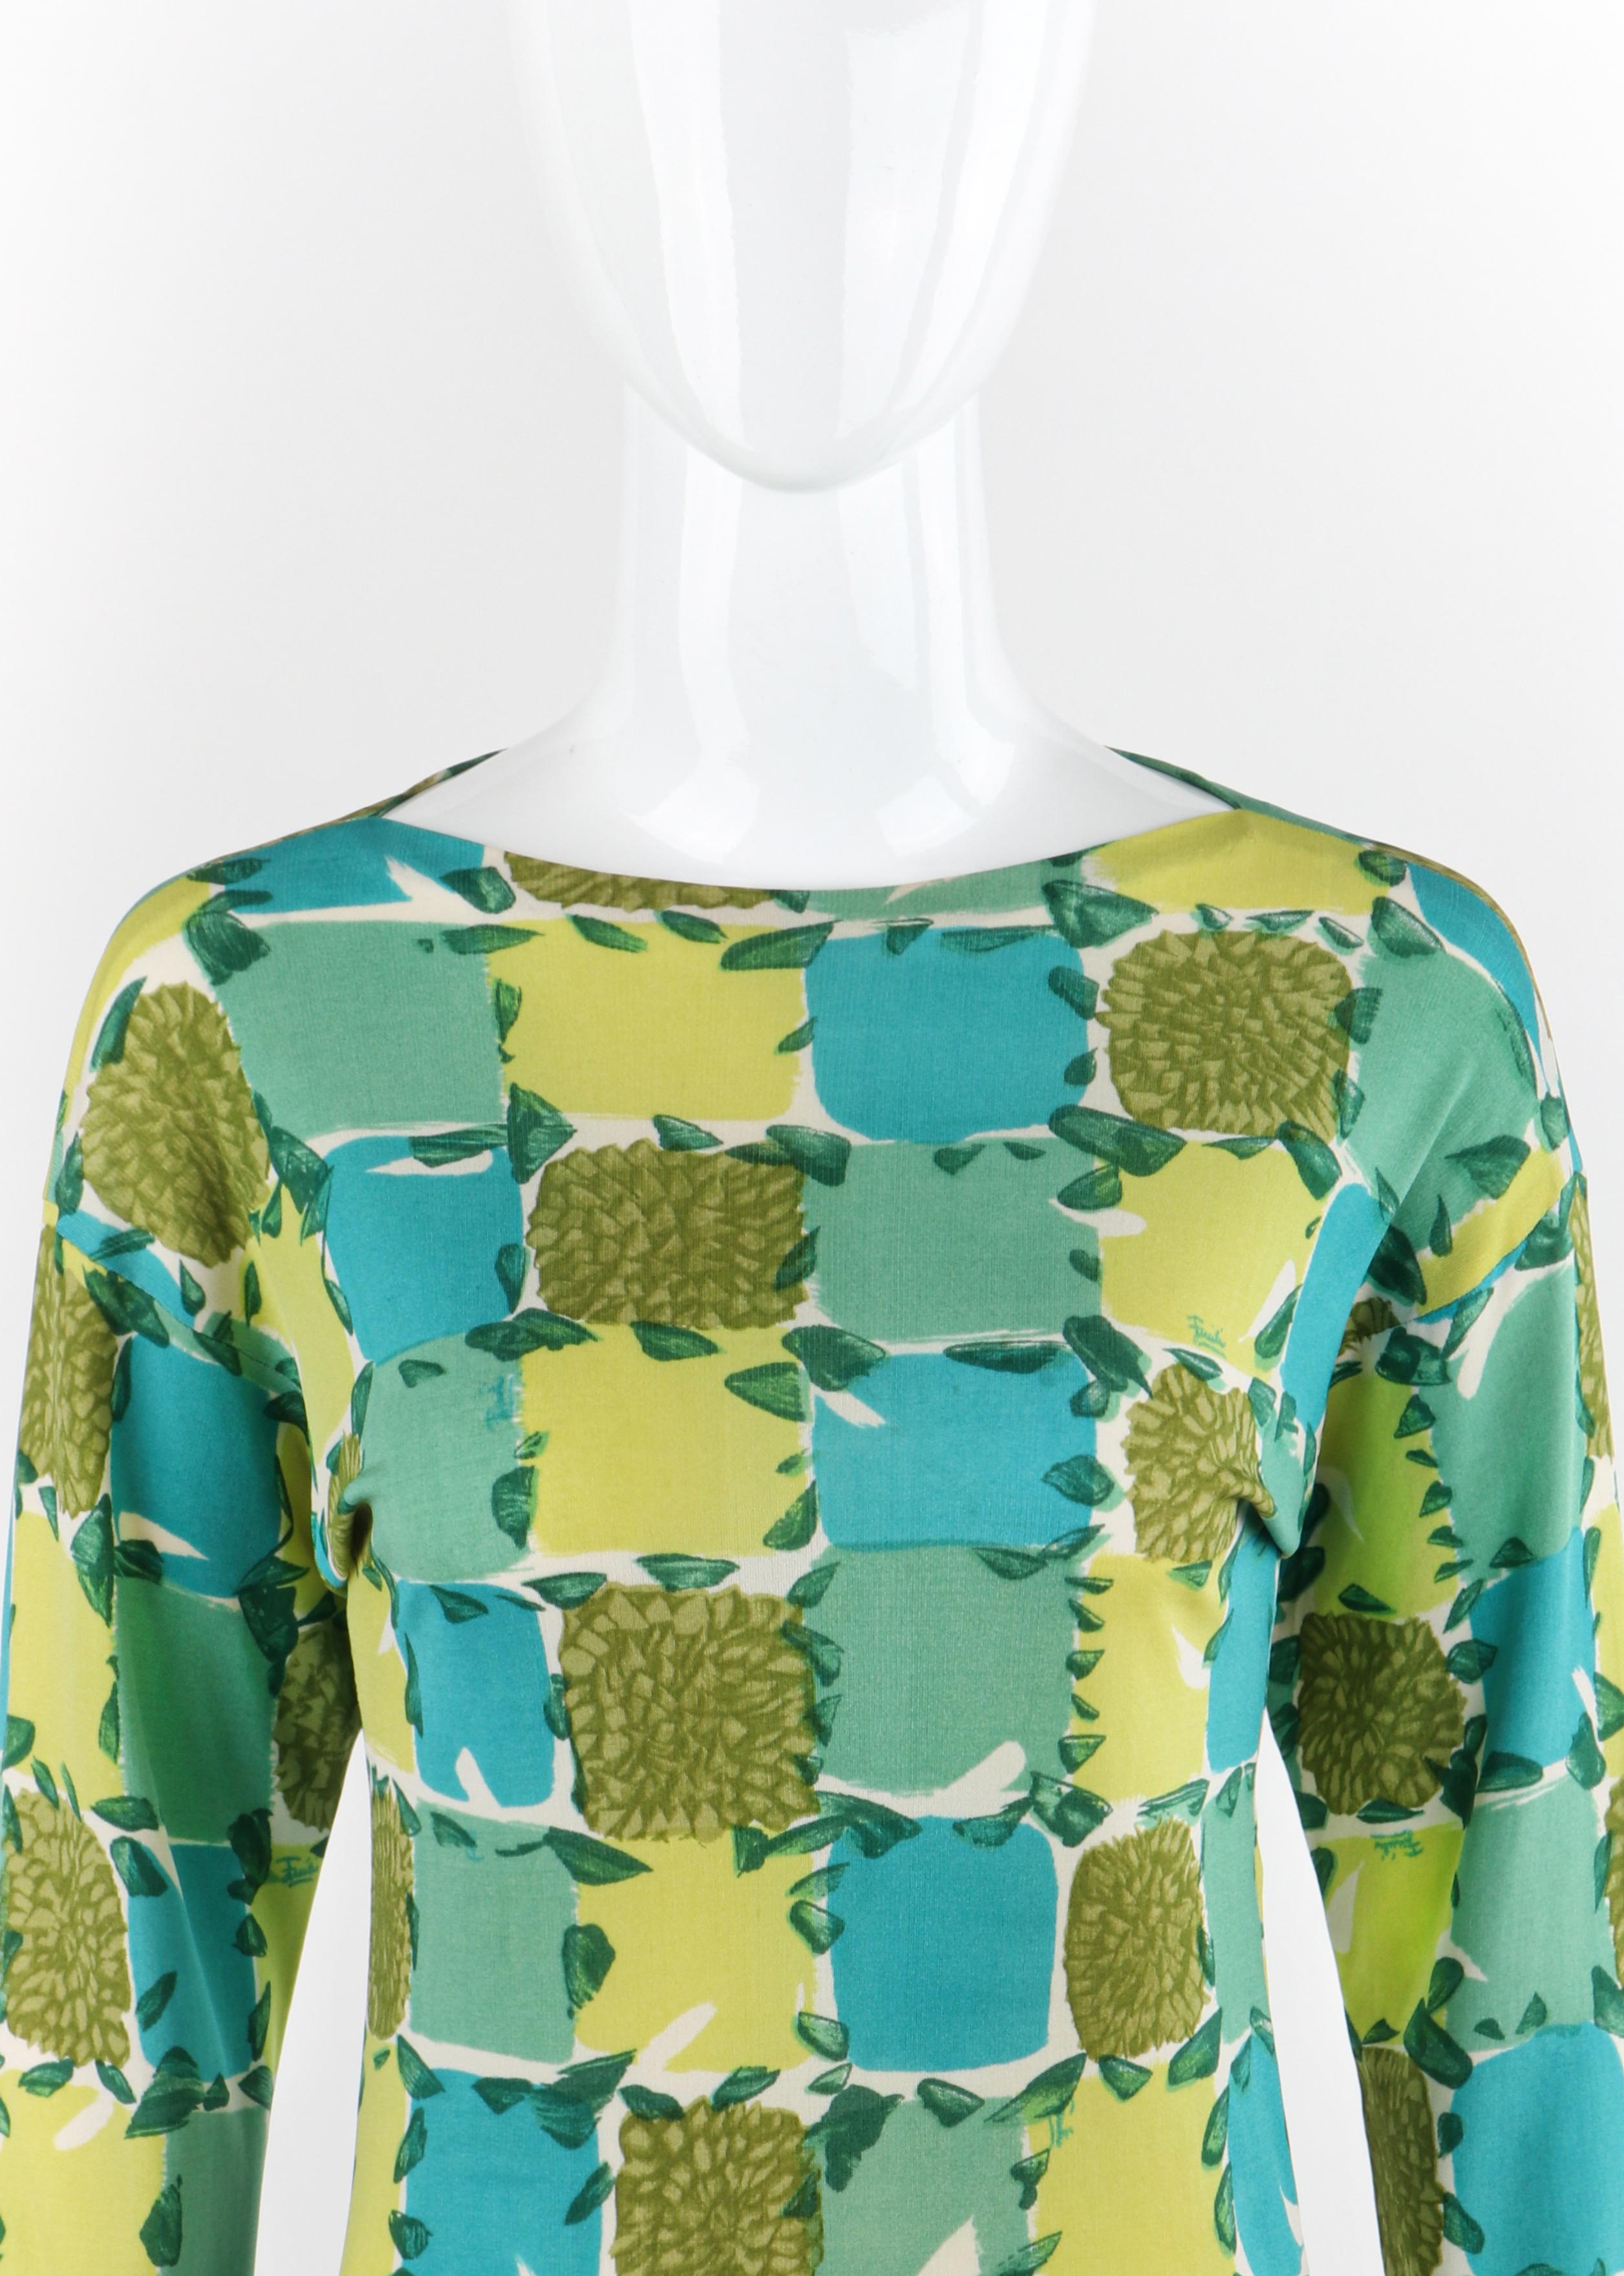 EMILIO PUCCI c.1956 Blue Yellow Green Abstract Floral Check Print Silk Sweater In Good Condition For Sale In Thiensville, WI